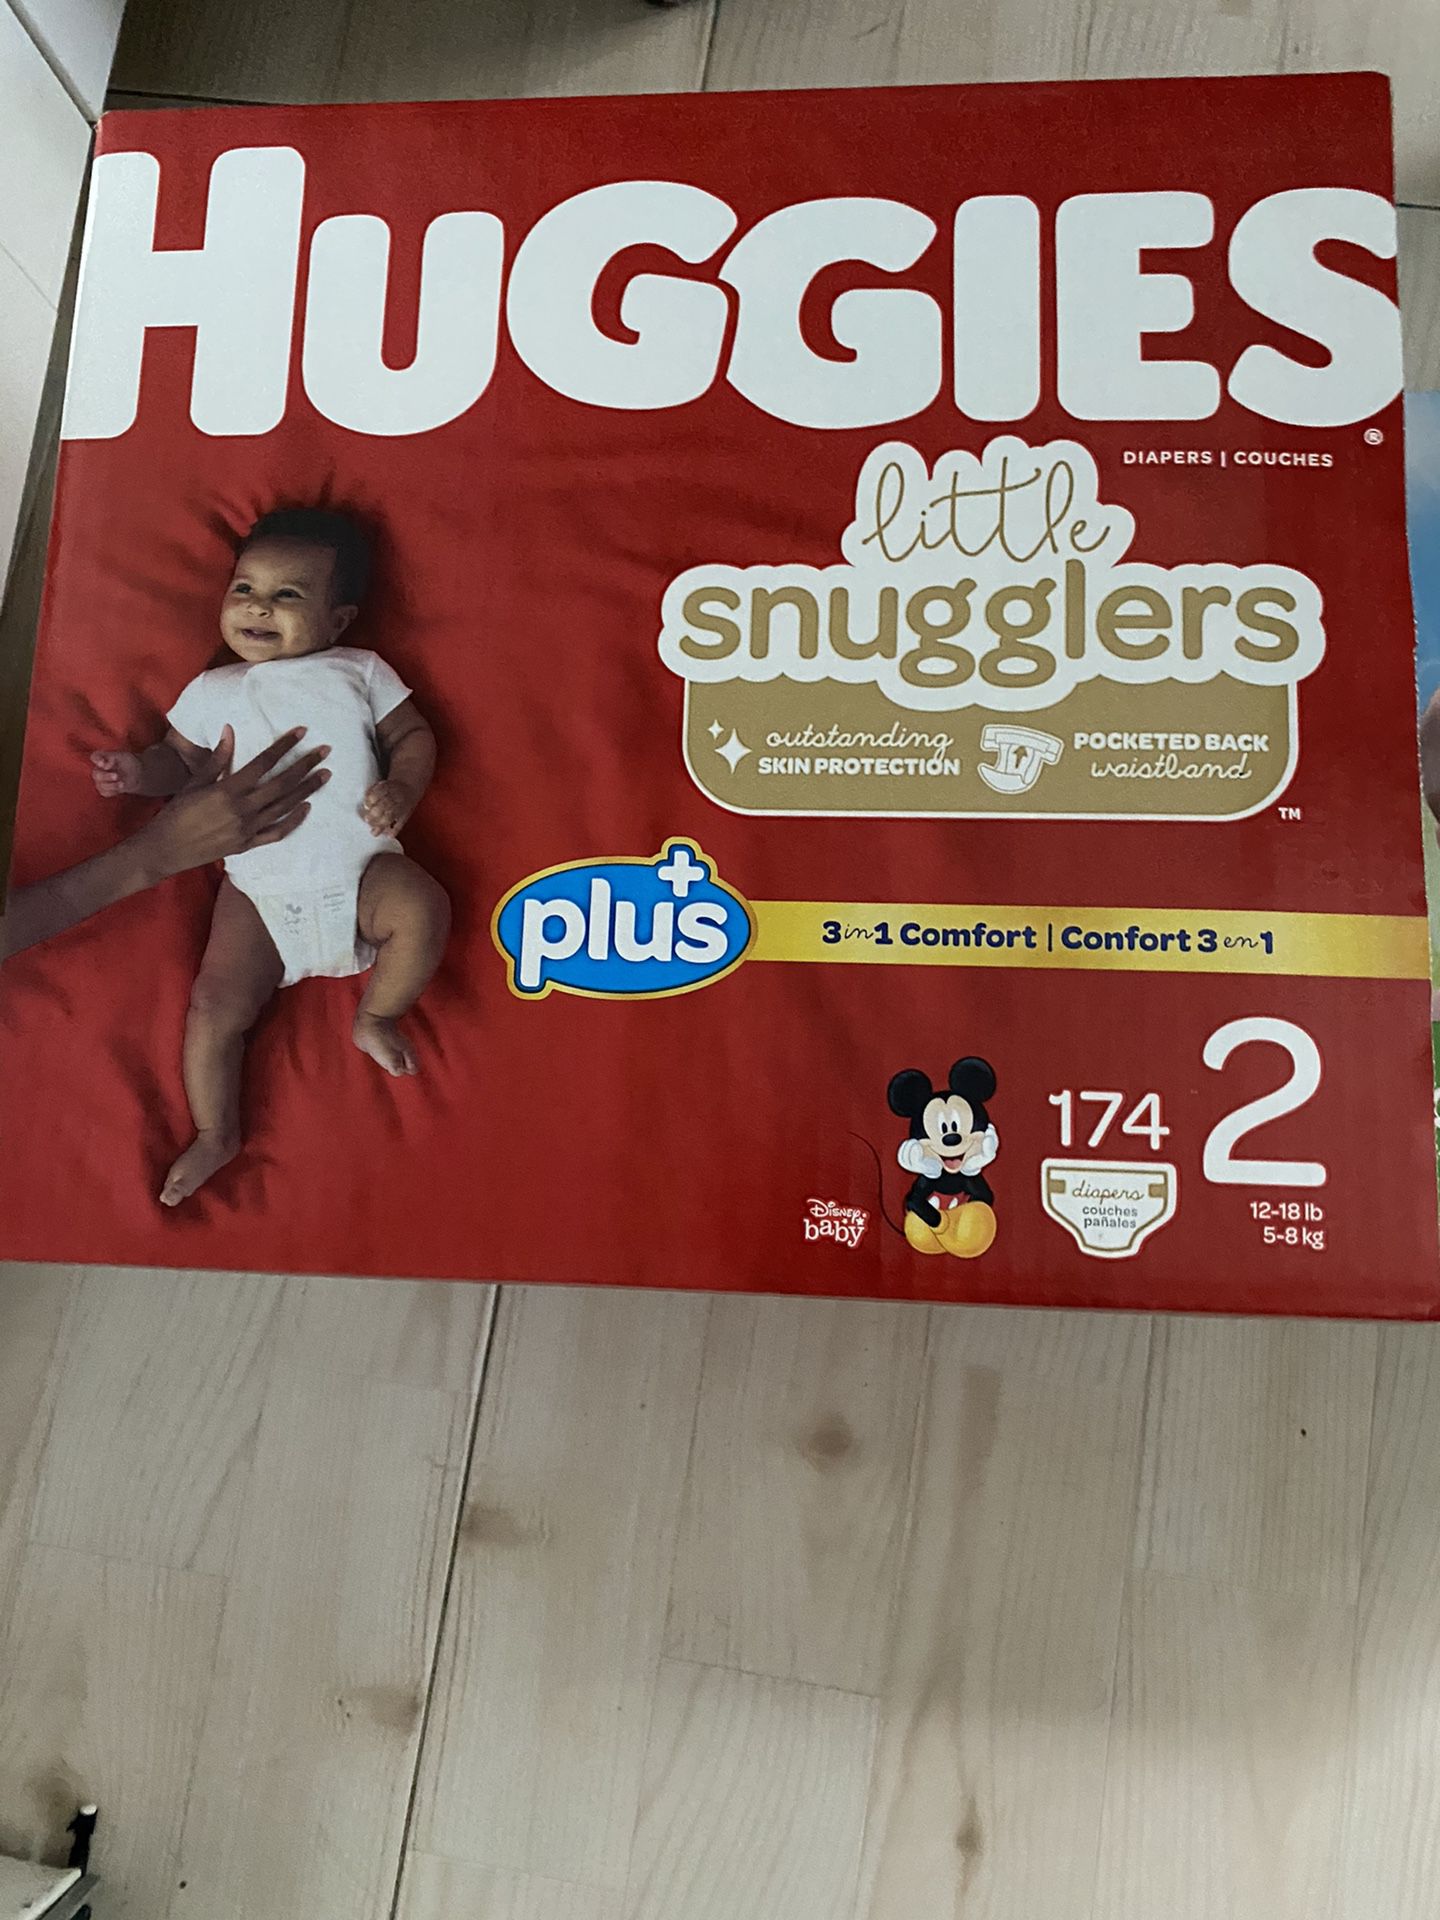 Diapers and Wipes